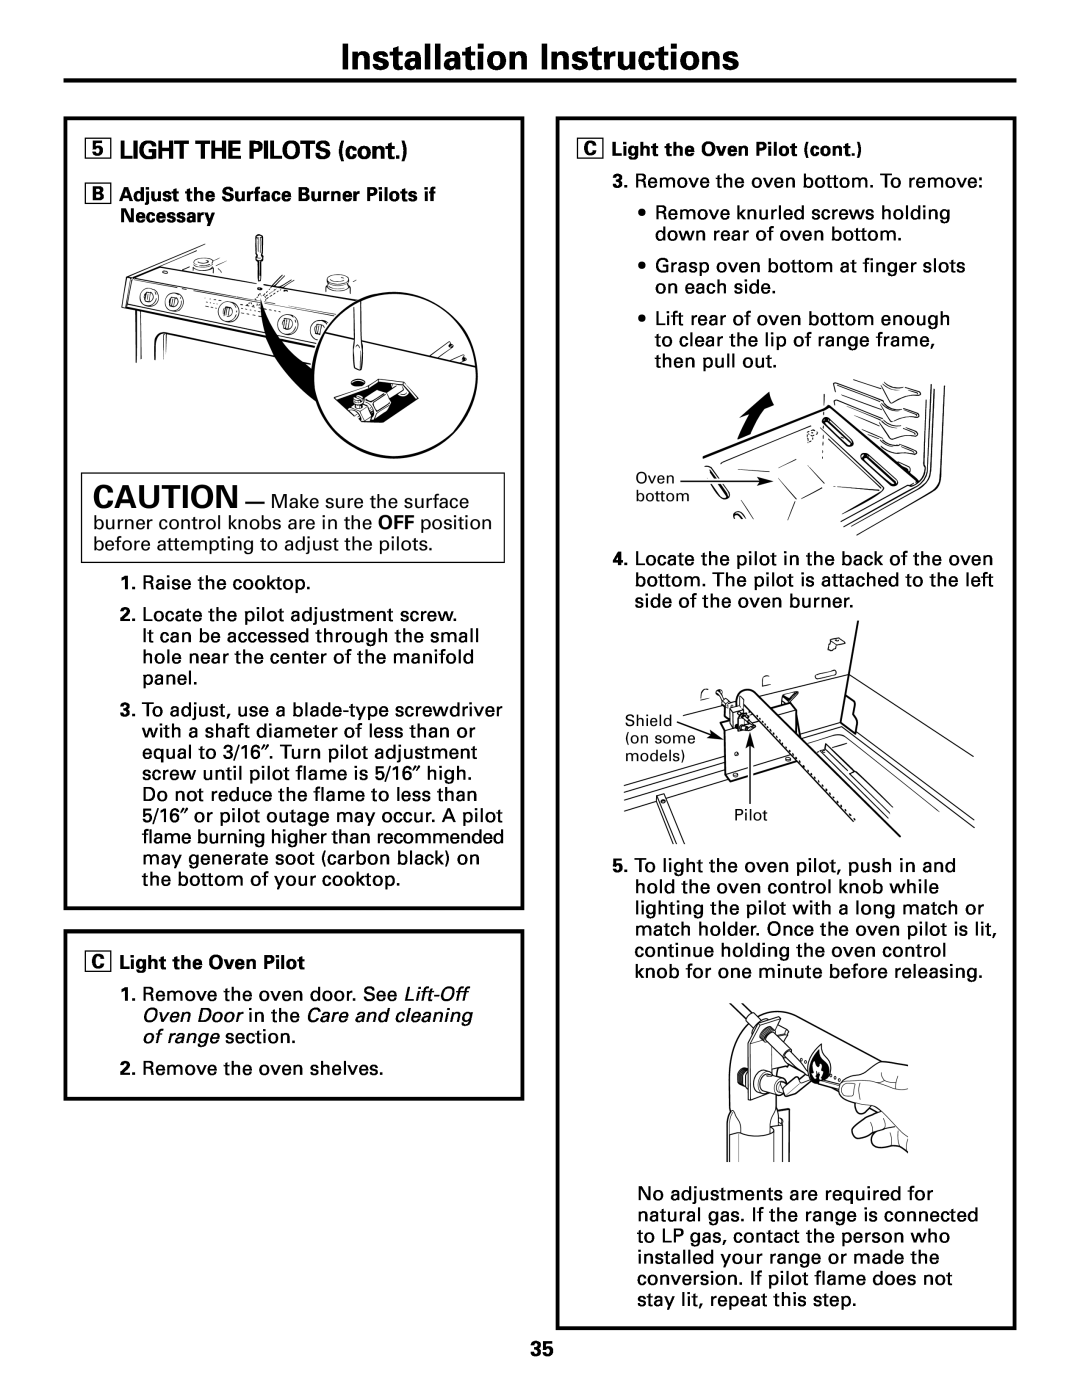 GE JGBC20 5LIGHT THE PILOTS cont, Installation Instructions, BAdjust the Surface Burner Pilots if Necessary 